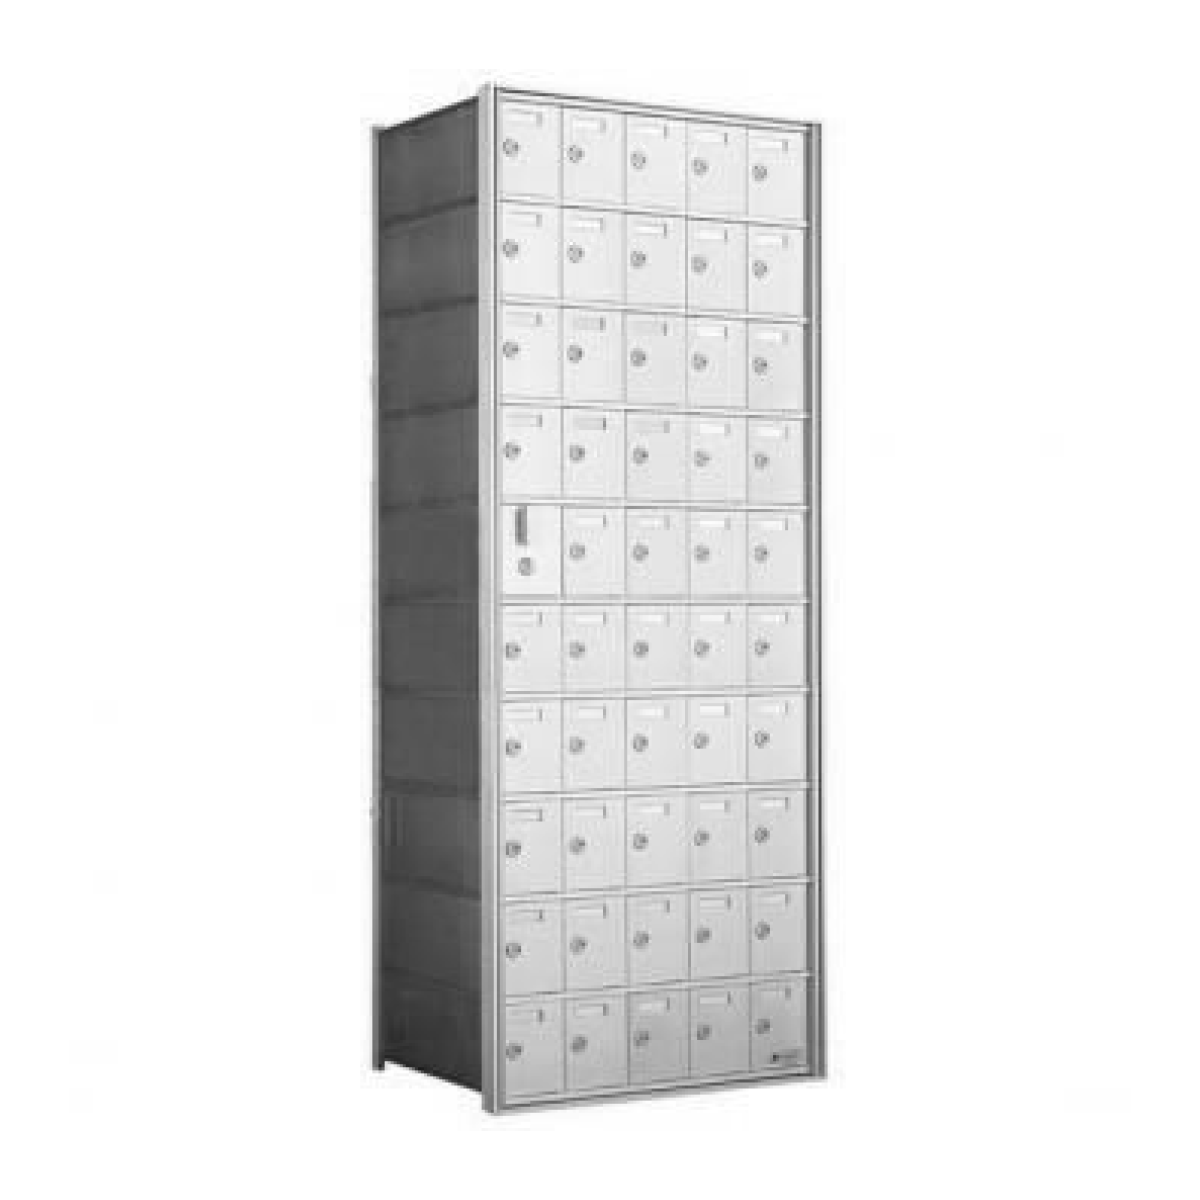 10 Doors High x 5 Doors (49 Tenants) 1600 Series Front-Load Private Distribution Cluster Mailbox in Anodized Aluminum Finish Product Image